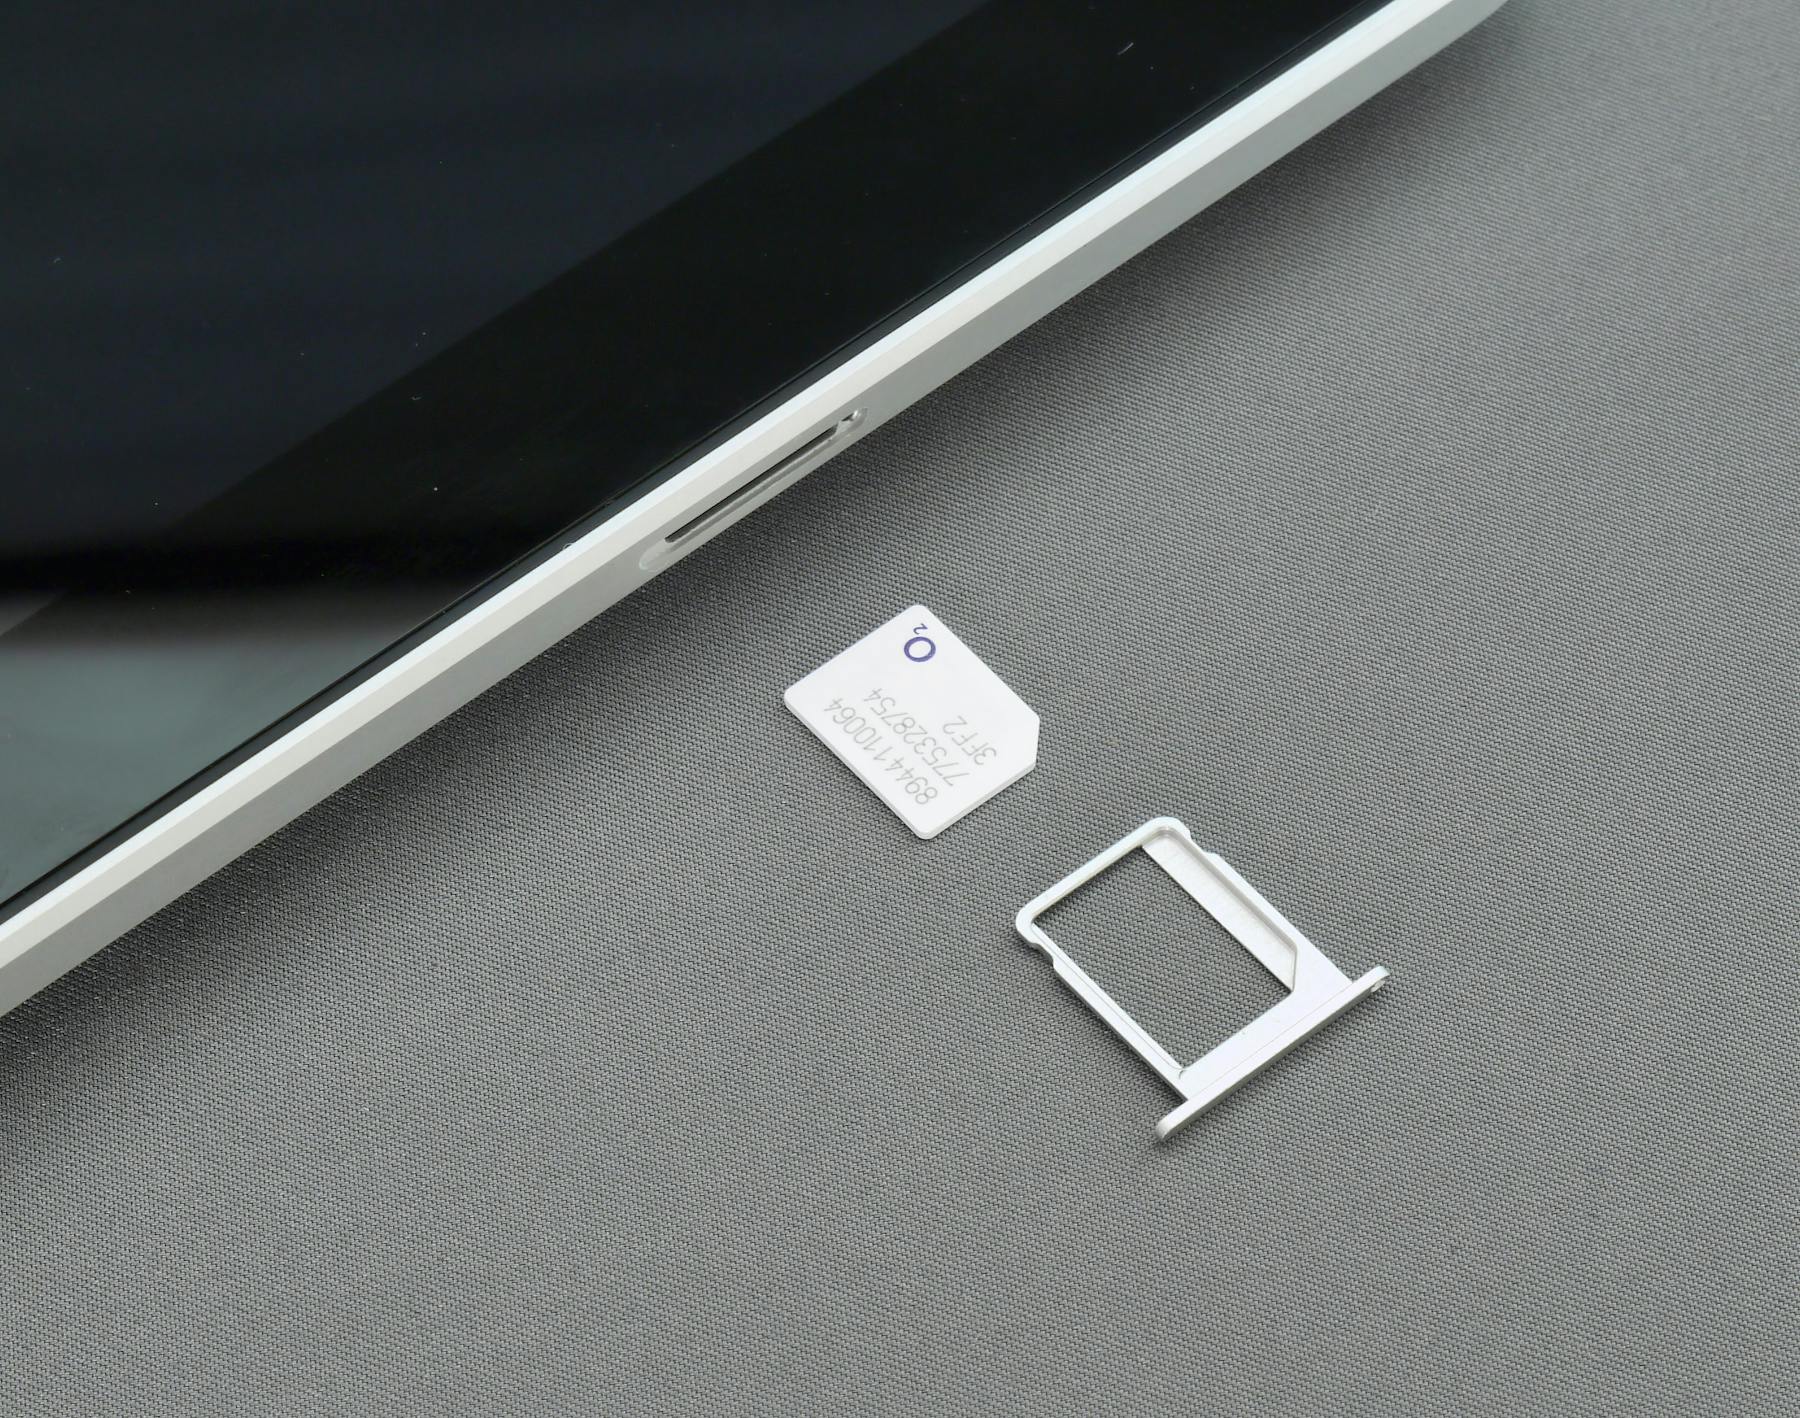 SIM card and adapter next to an iPad.